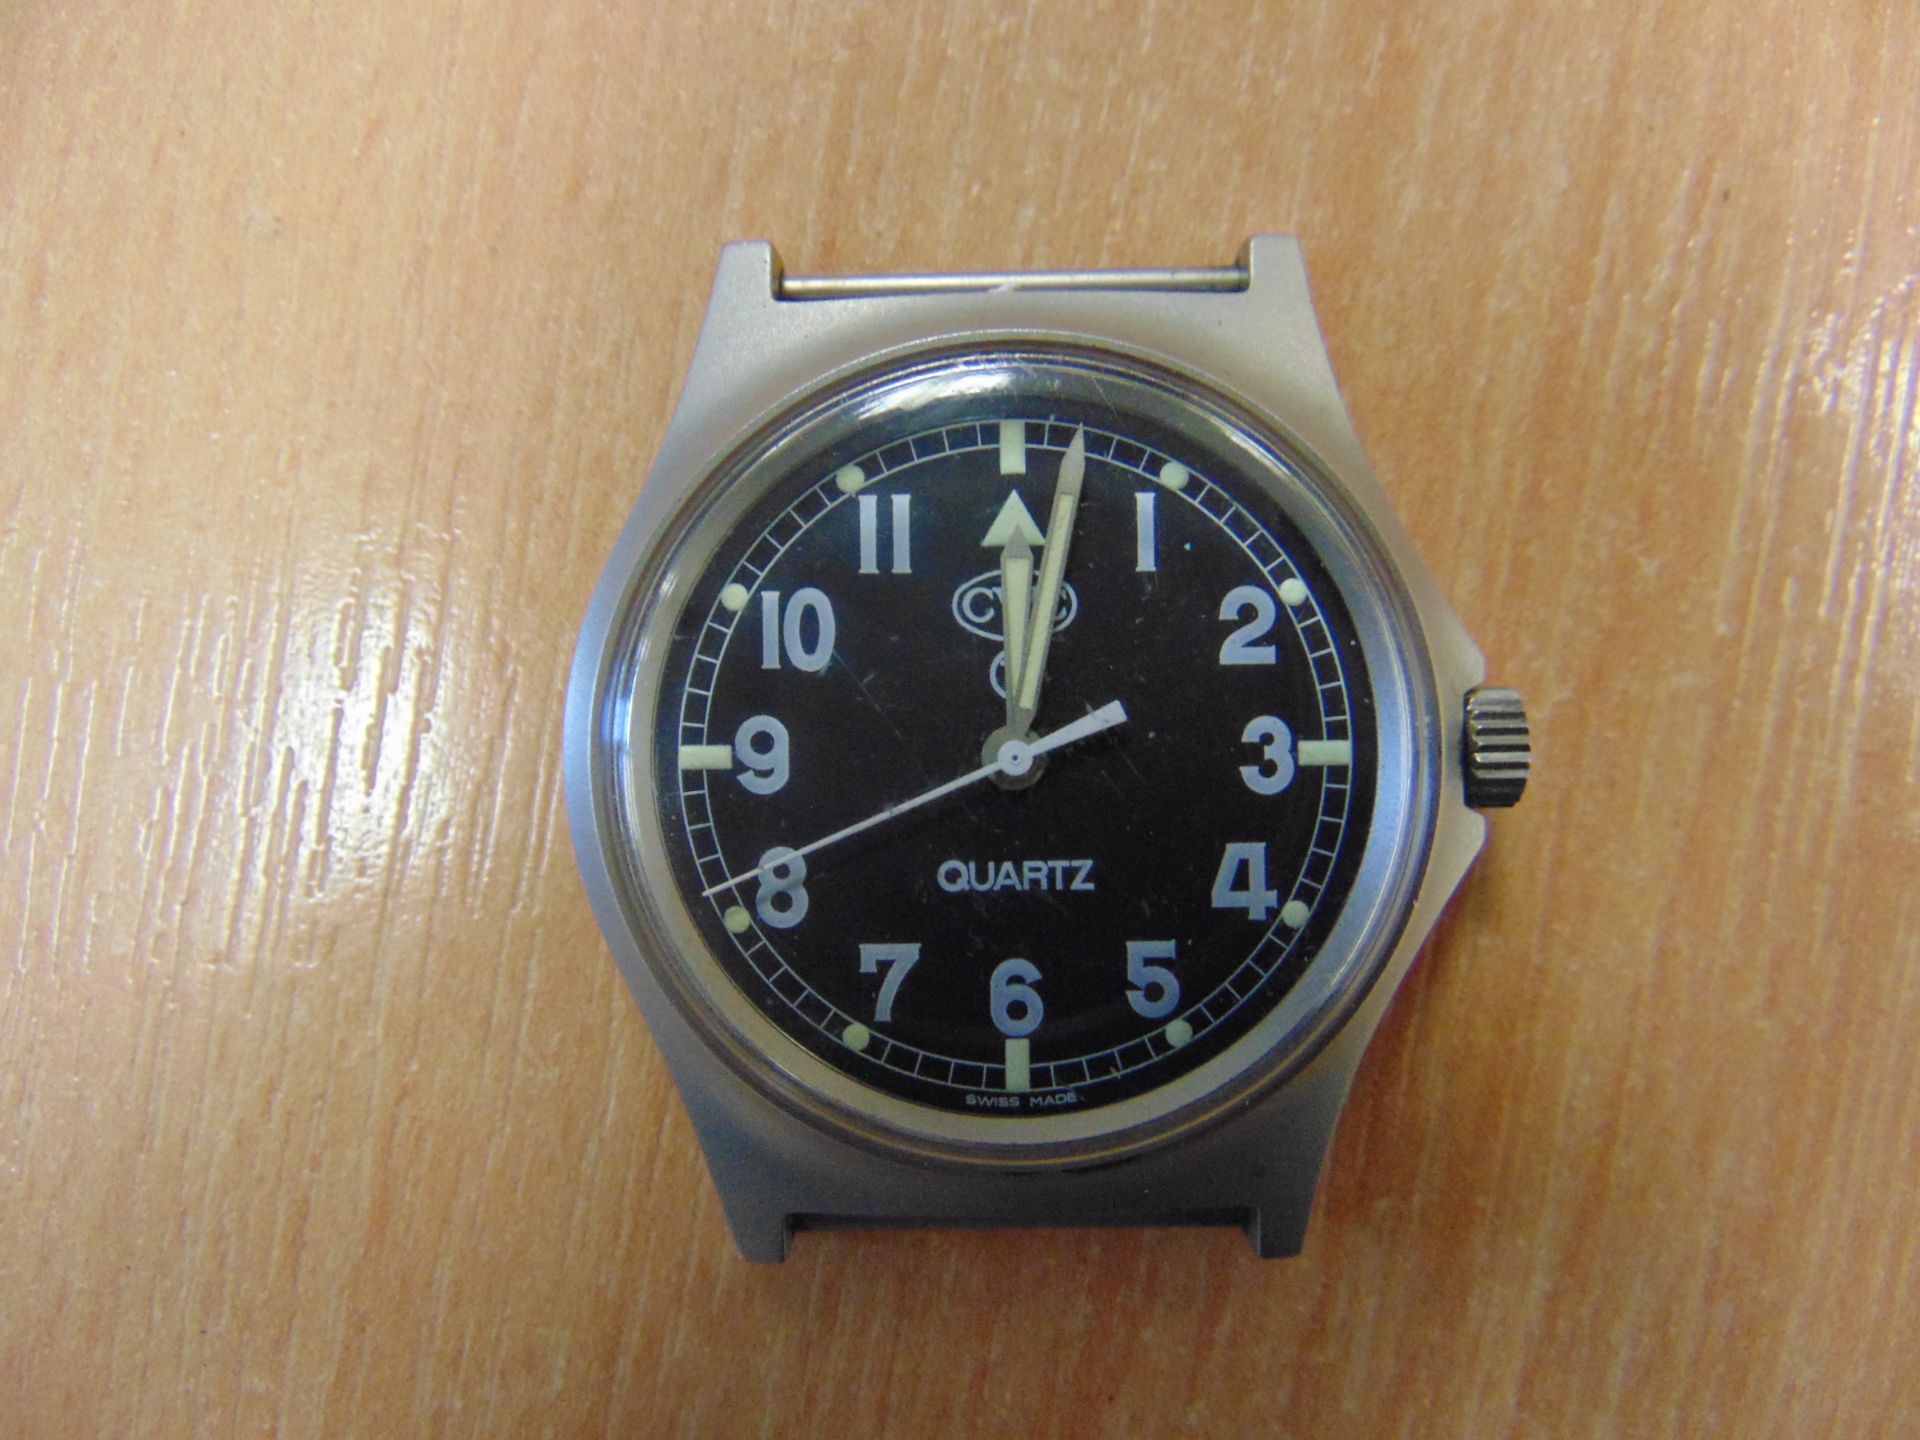 CWC W10 BRITISH ARMY ISSUE SERVICE WATCH NATO MARKINGS DATED 1997 - Image 5 of 10